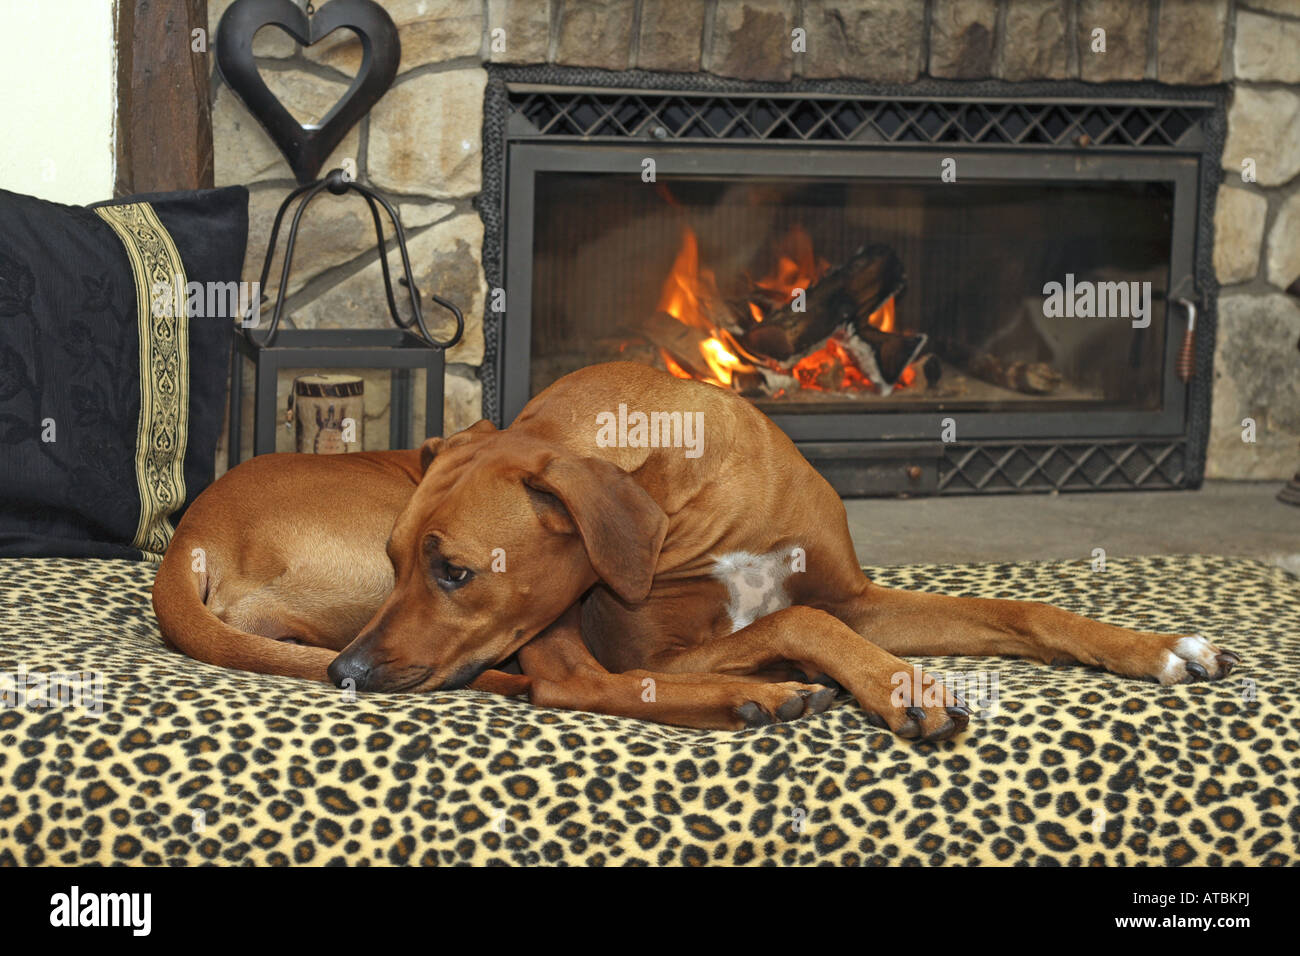 Rhodesian Ridgeback (Canis lupus f. familiaris), lying on sofa in front of a fireside Stock Photo